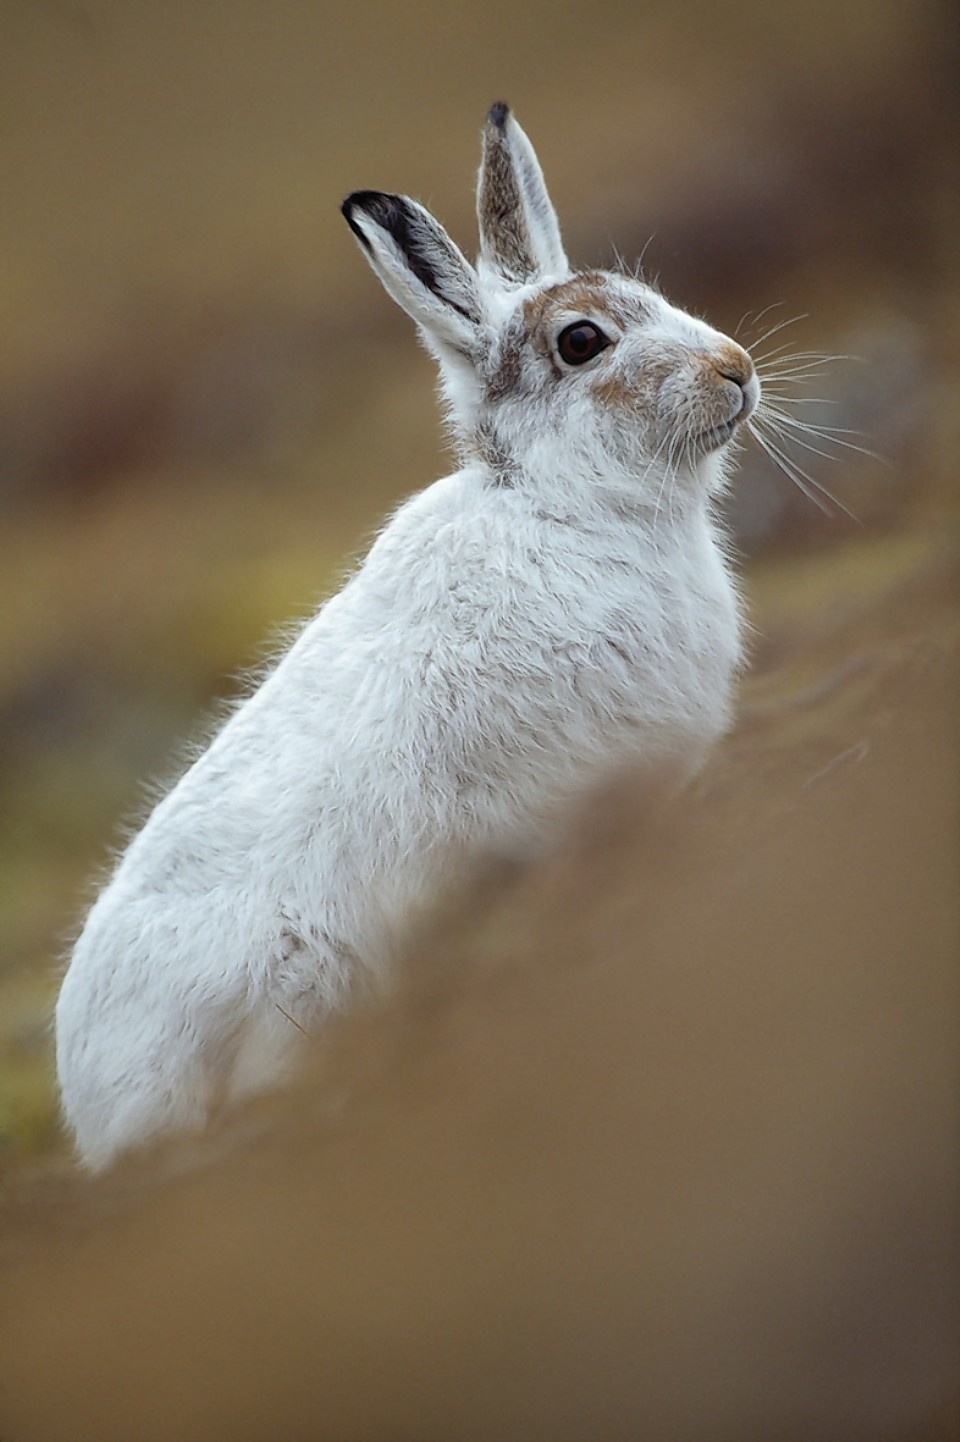 Estates are urged not to carry out large-scale culls of mountain hares.